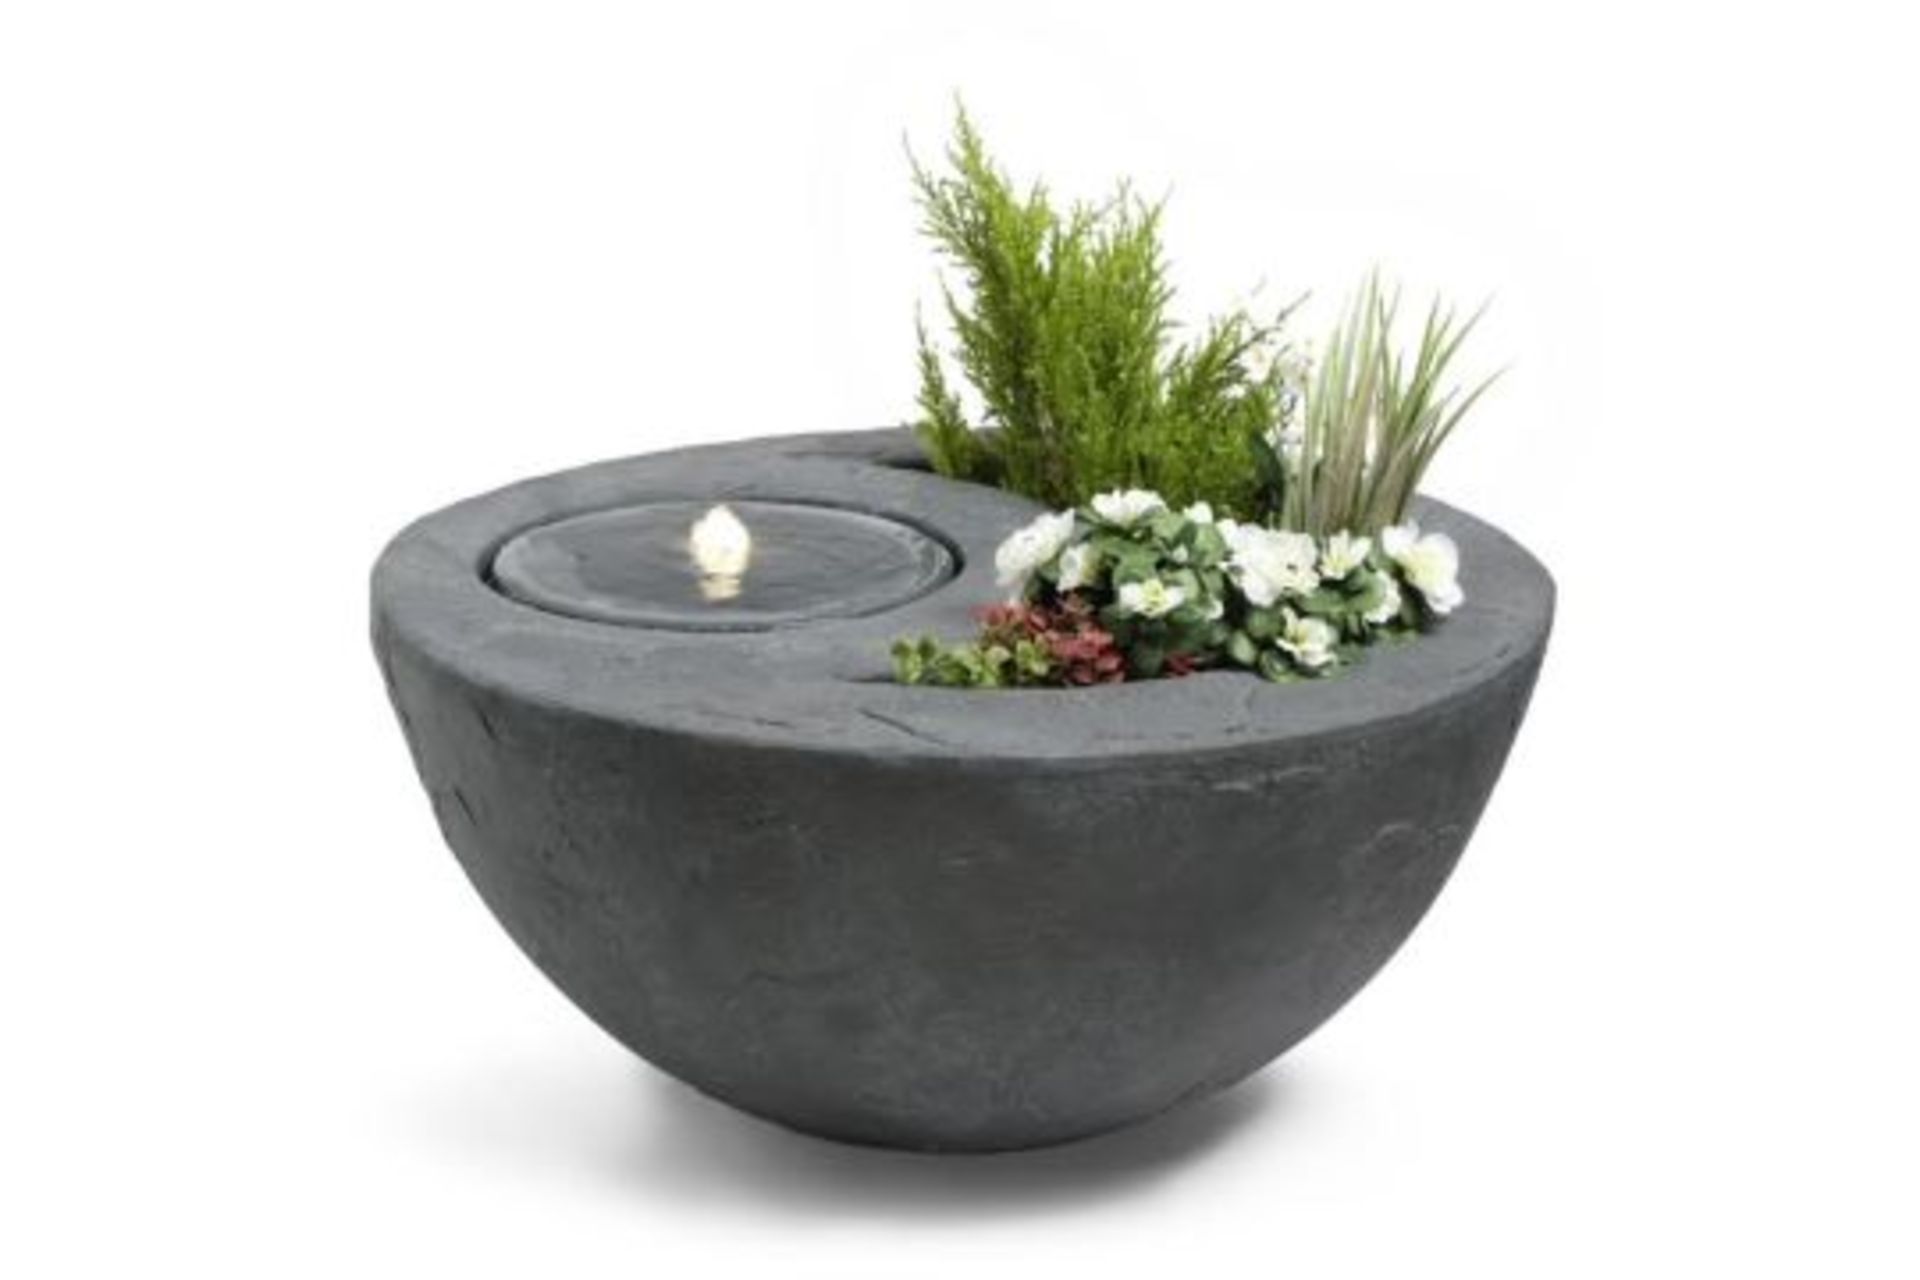 New & Boxed Dual Water Feature and Planter - Garden Bowl Design Planter, Indoor/Outdoor LED Lights - Image 6 of 6